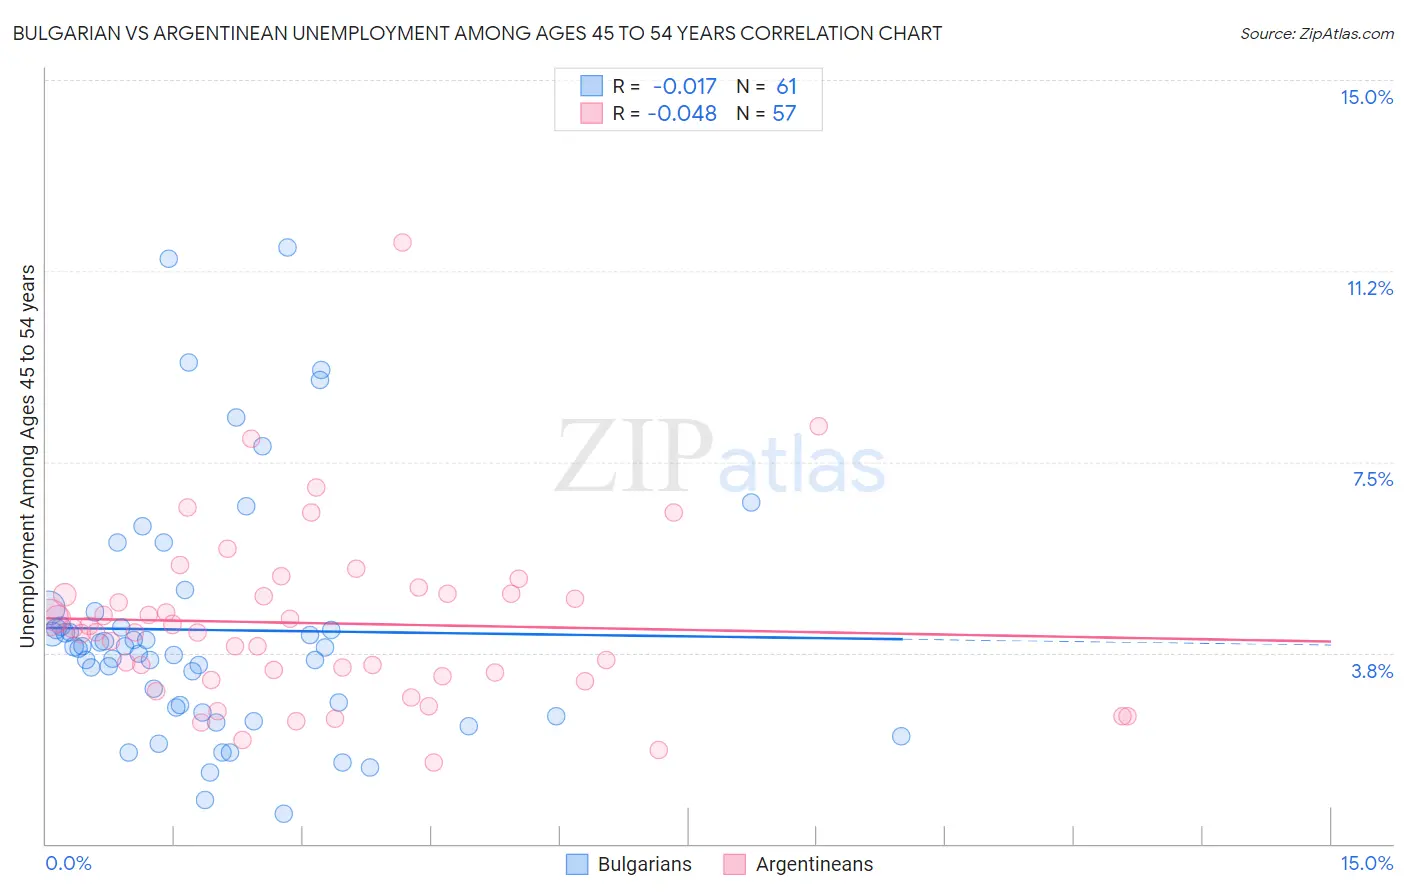 Bulgarian vs Argentinean Unemployment Among Ages 45 to 54 years